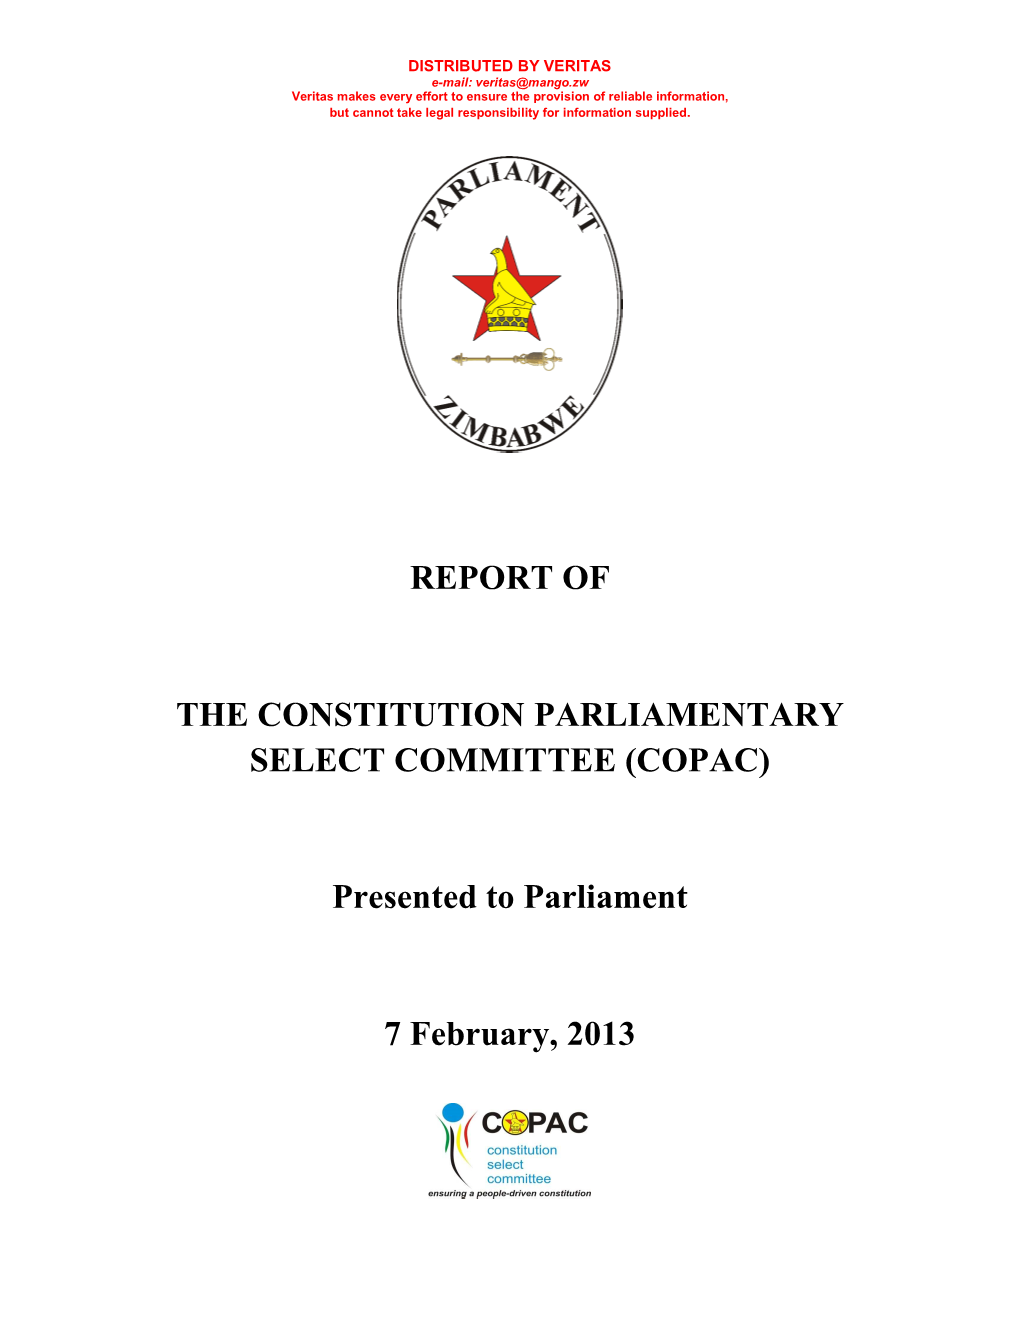 (COPAC) Presented to Parliament 7 February, 2013